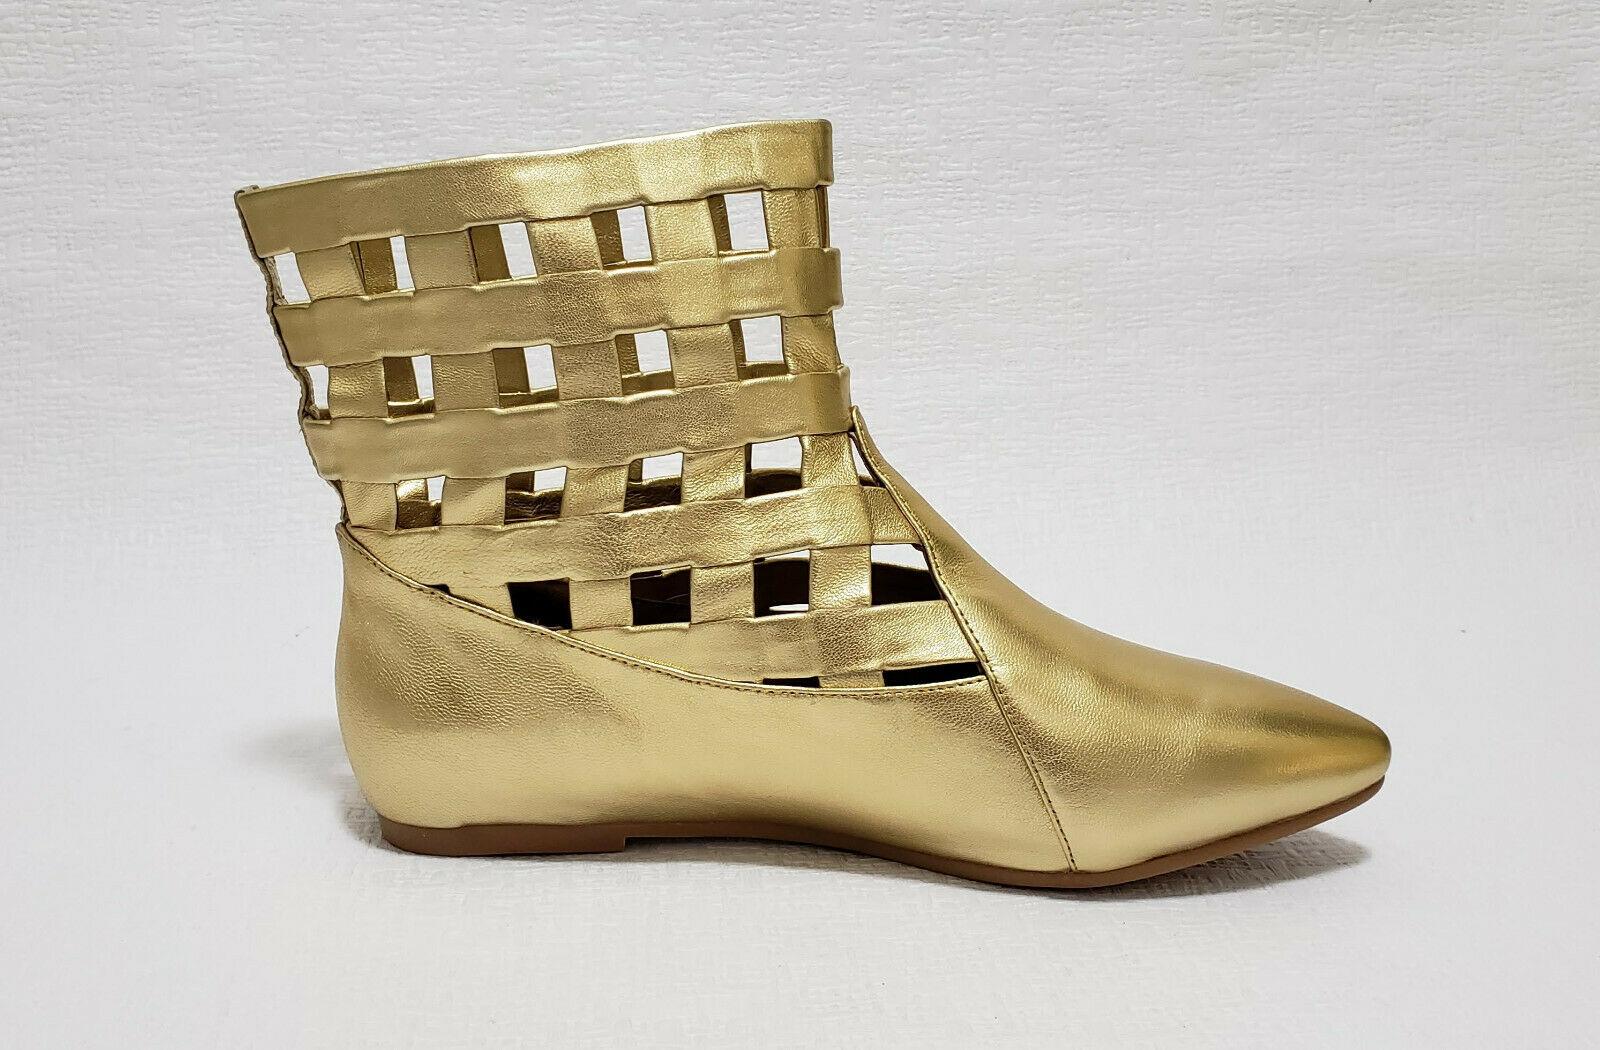 Jeffrey Campbell  Bueller Metallic Gold Womens Fashion Leather Ankle Booties US 7.5 - SVNYFancy